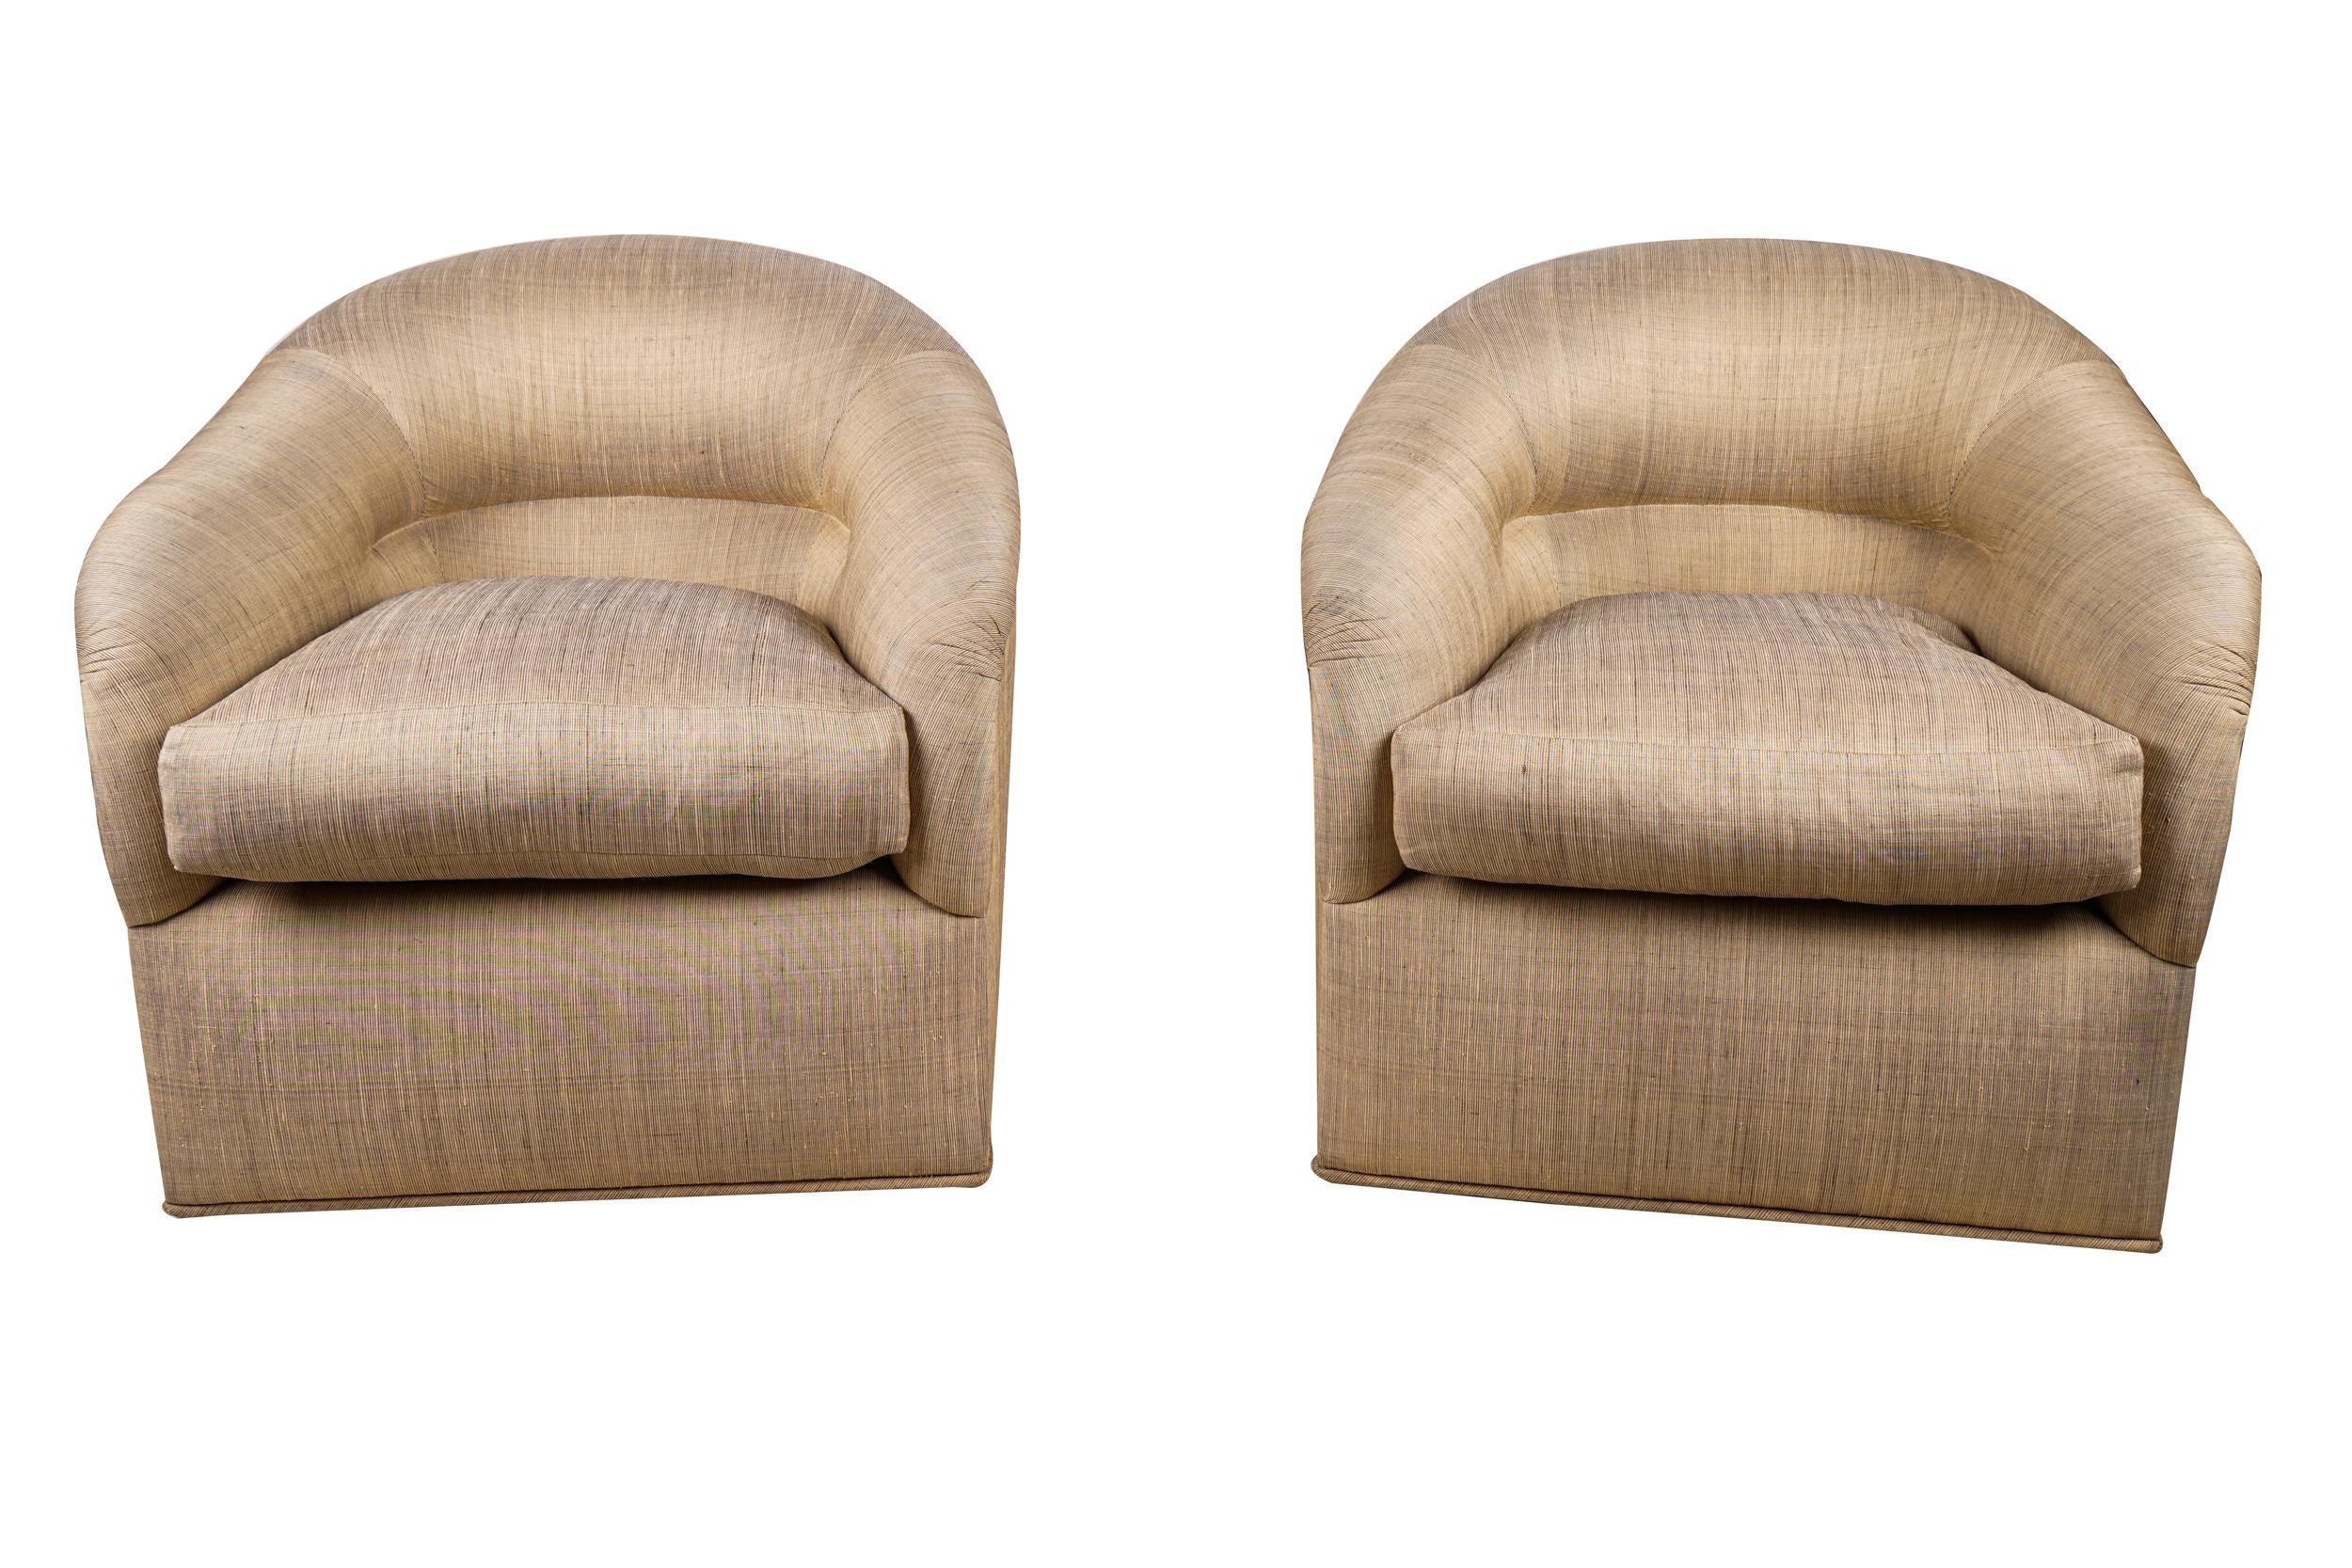 Pair of opulent J. Robert Scott upholstered club chairs. Designed by Sally Sirkin Lewis. Original labels. Deep and very comfortable. Perfect for long conversations.